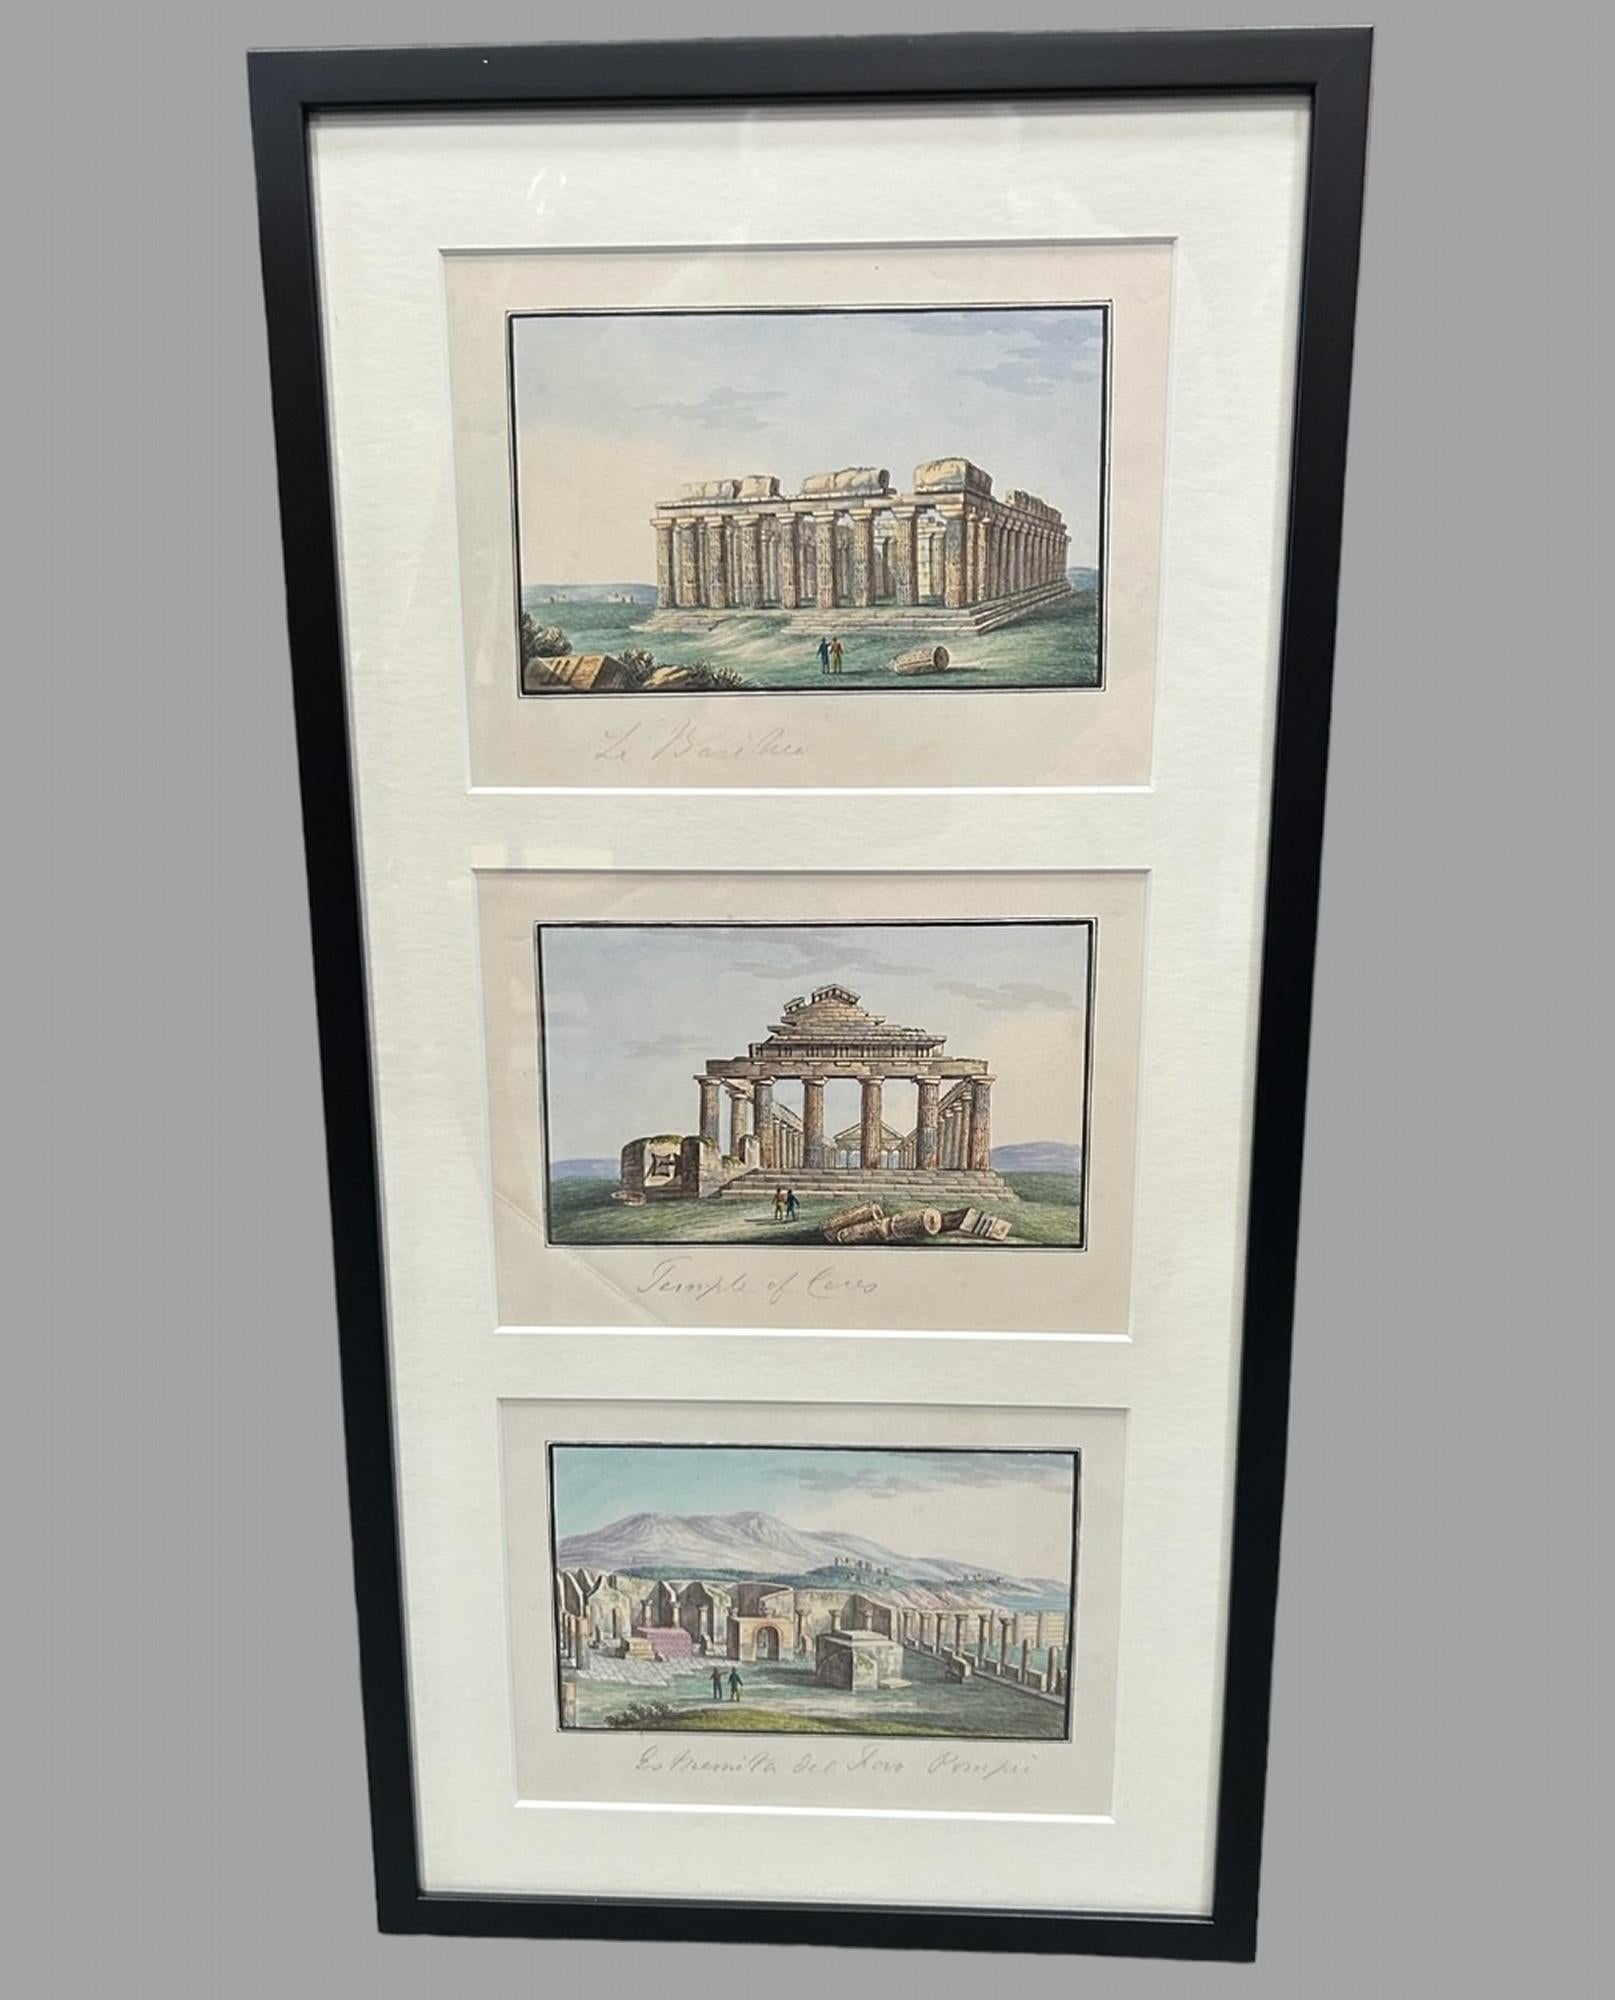 A Fabulous Set of Six Framed and Glazed Intricate Gouache's of Italian Landmarks/Places of Interest taken from 19thc. Each frame has three intricate gouache's, beautifully detailed and are 17 x 10 cm in size , they have details in writing below of